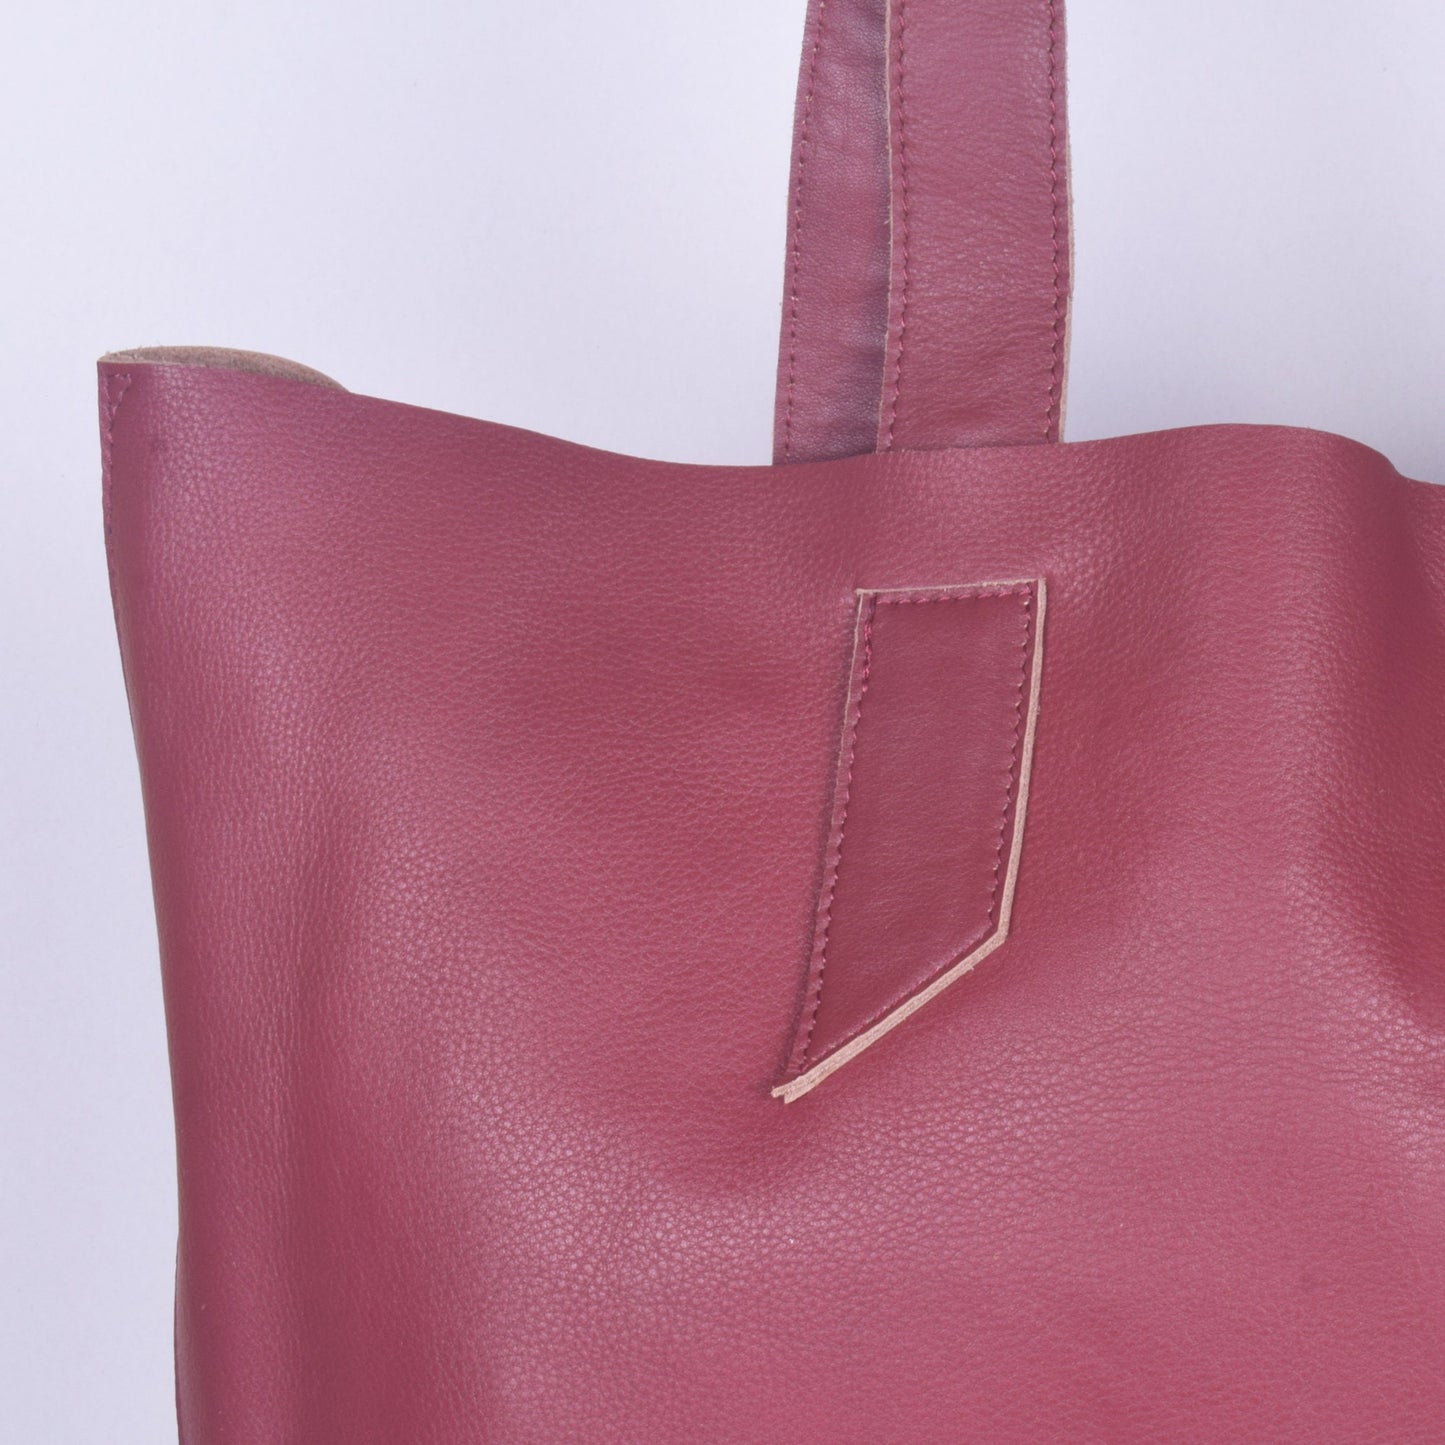 Maroon Leather Tote Bag, Raw edge Shopper Simple Purse Unlined Bag Shoulder Large Market Everyday Tote Bag Large Travelling Tote Bag